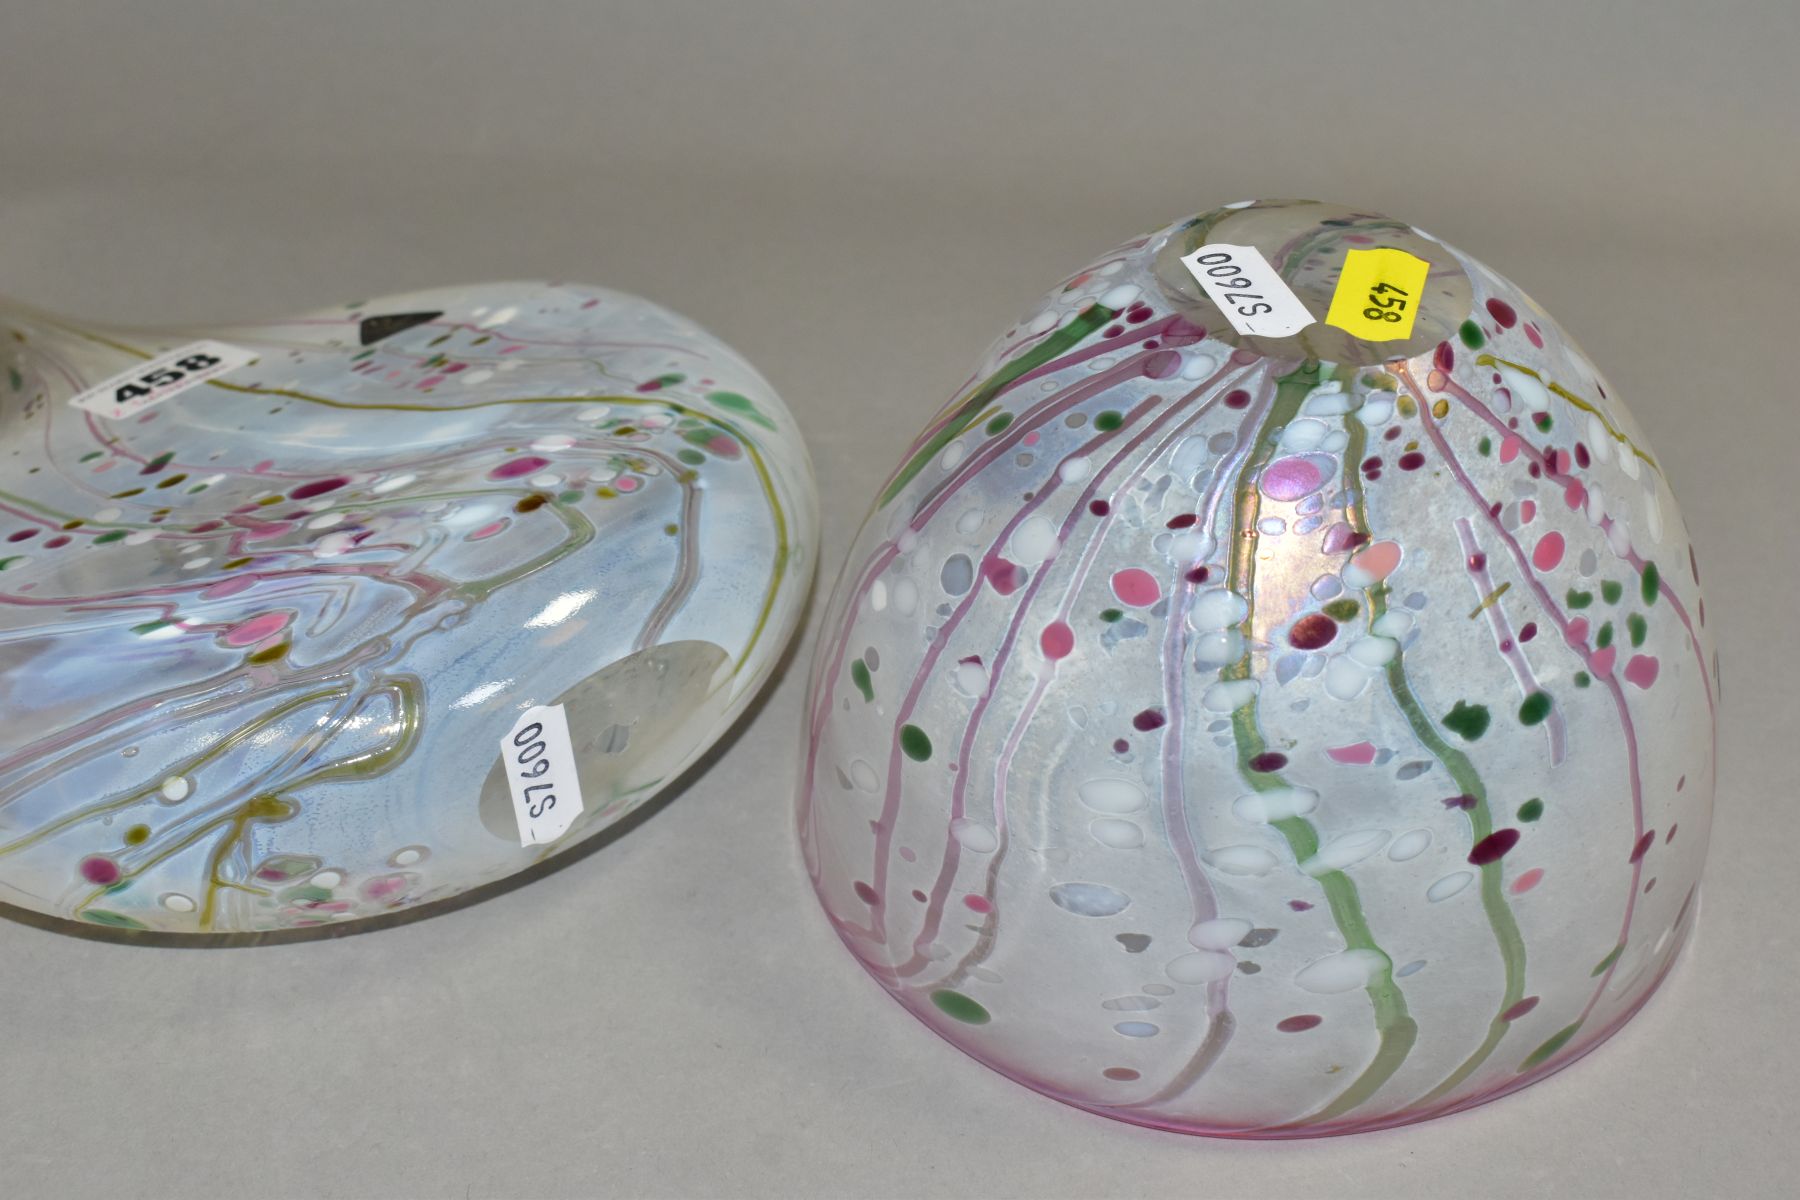 TWO PIECES OF ISLE OF WIGHT GLASS, both decorated with speckled and streaked pink and green design - Image 5 of 7